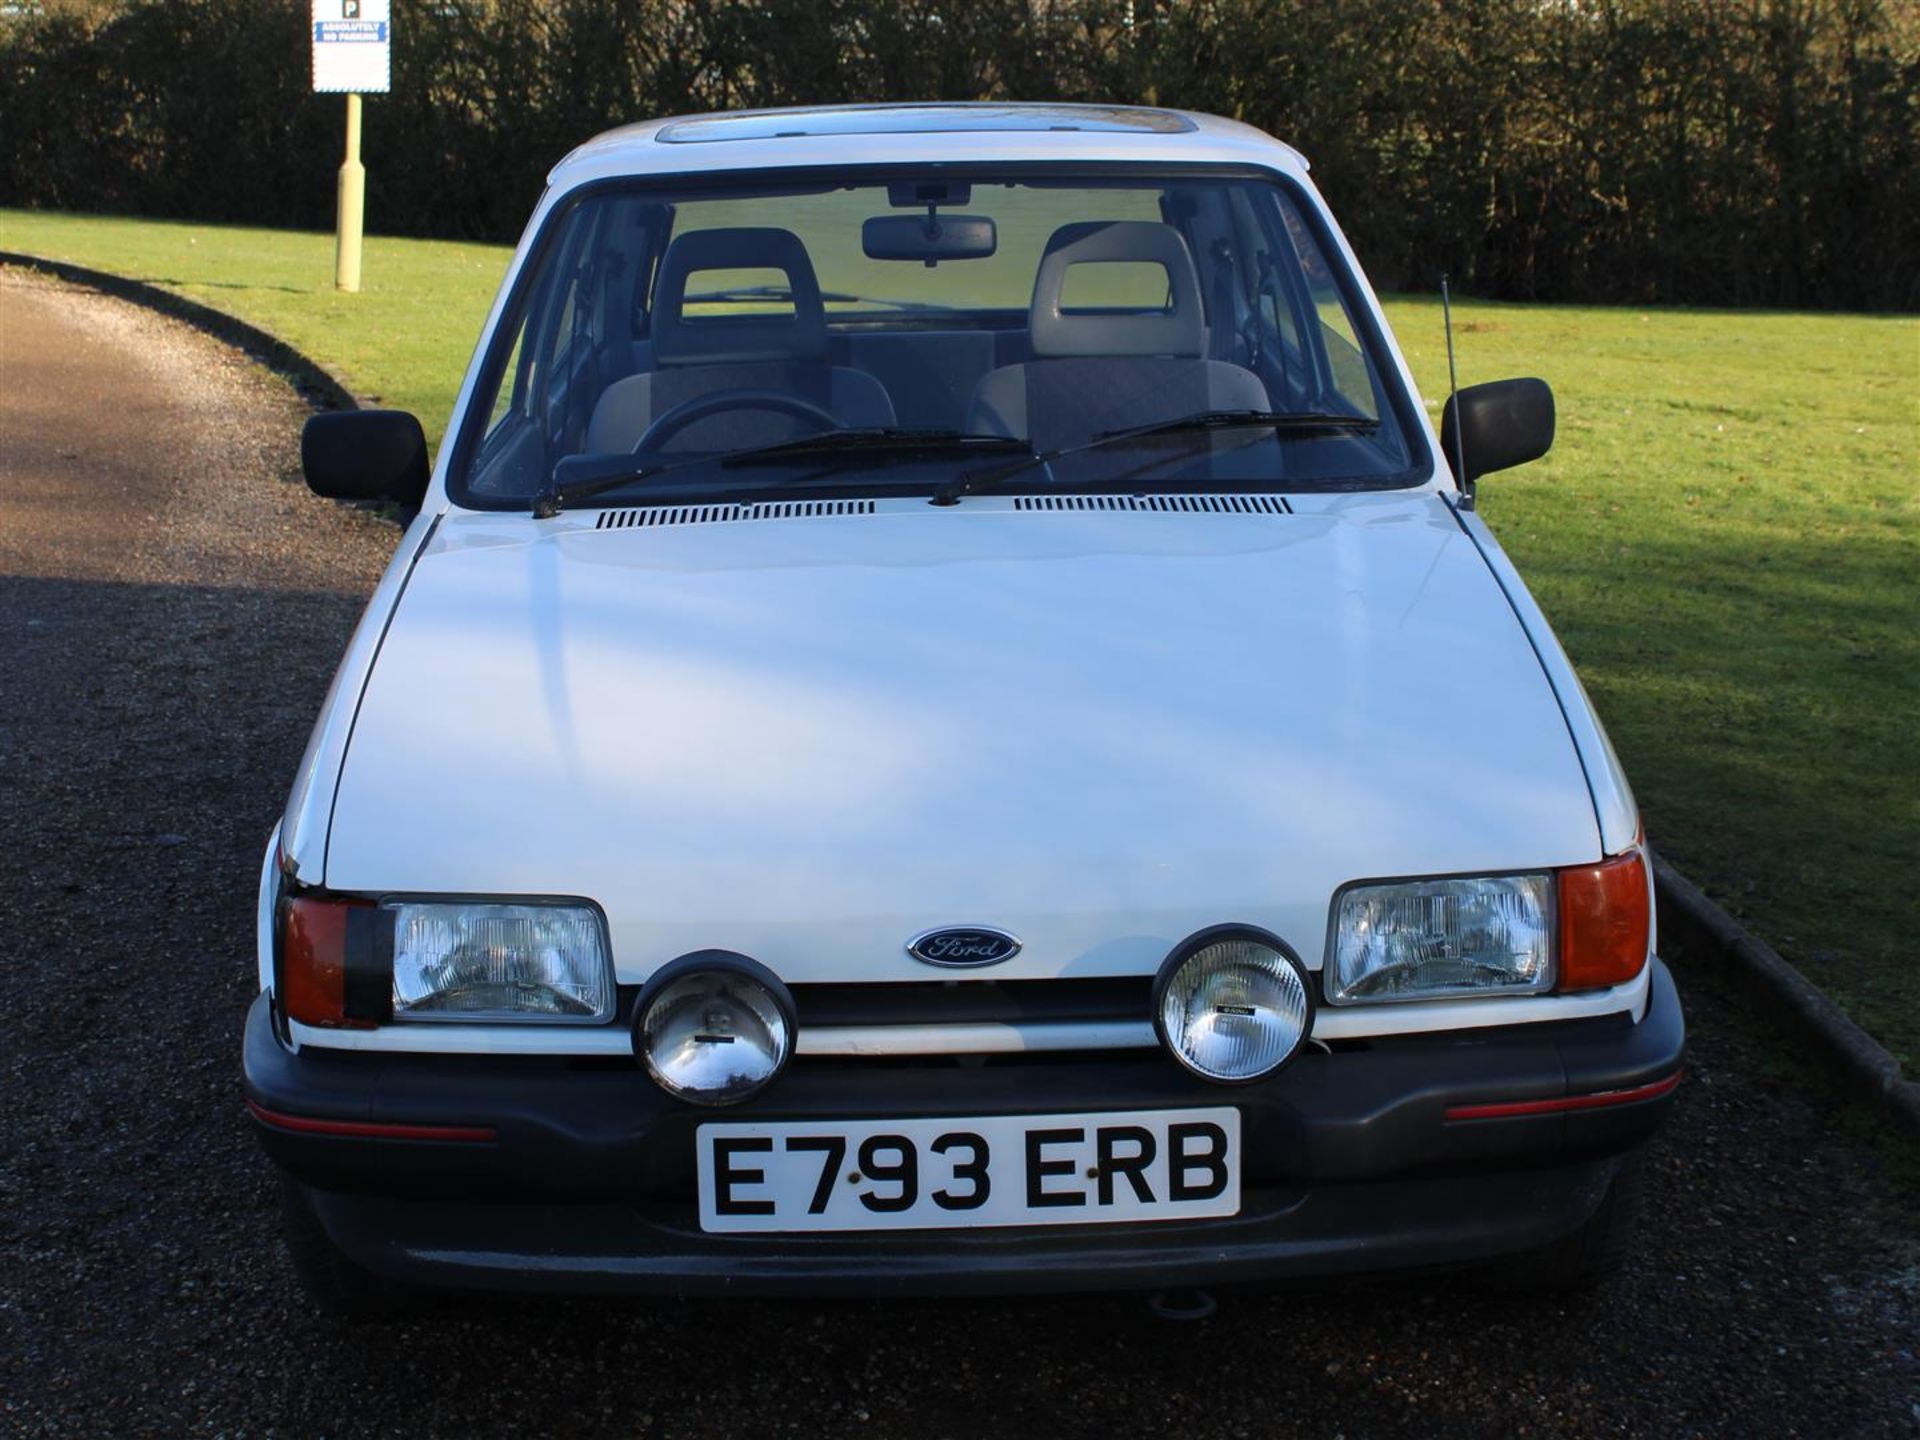 1987 Ford Fiesta 1.4 S Mk2 - Image 2 of 29